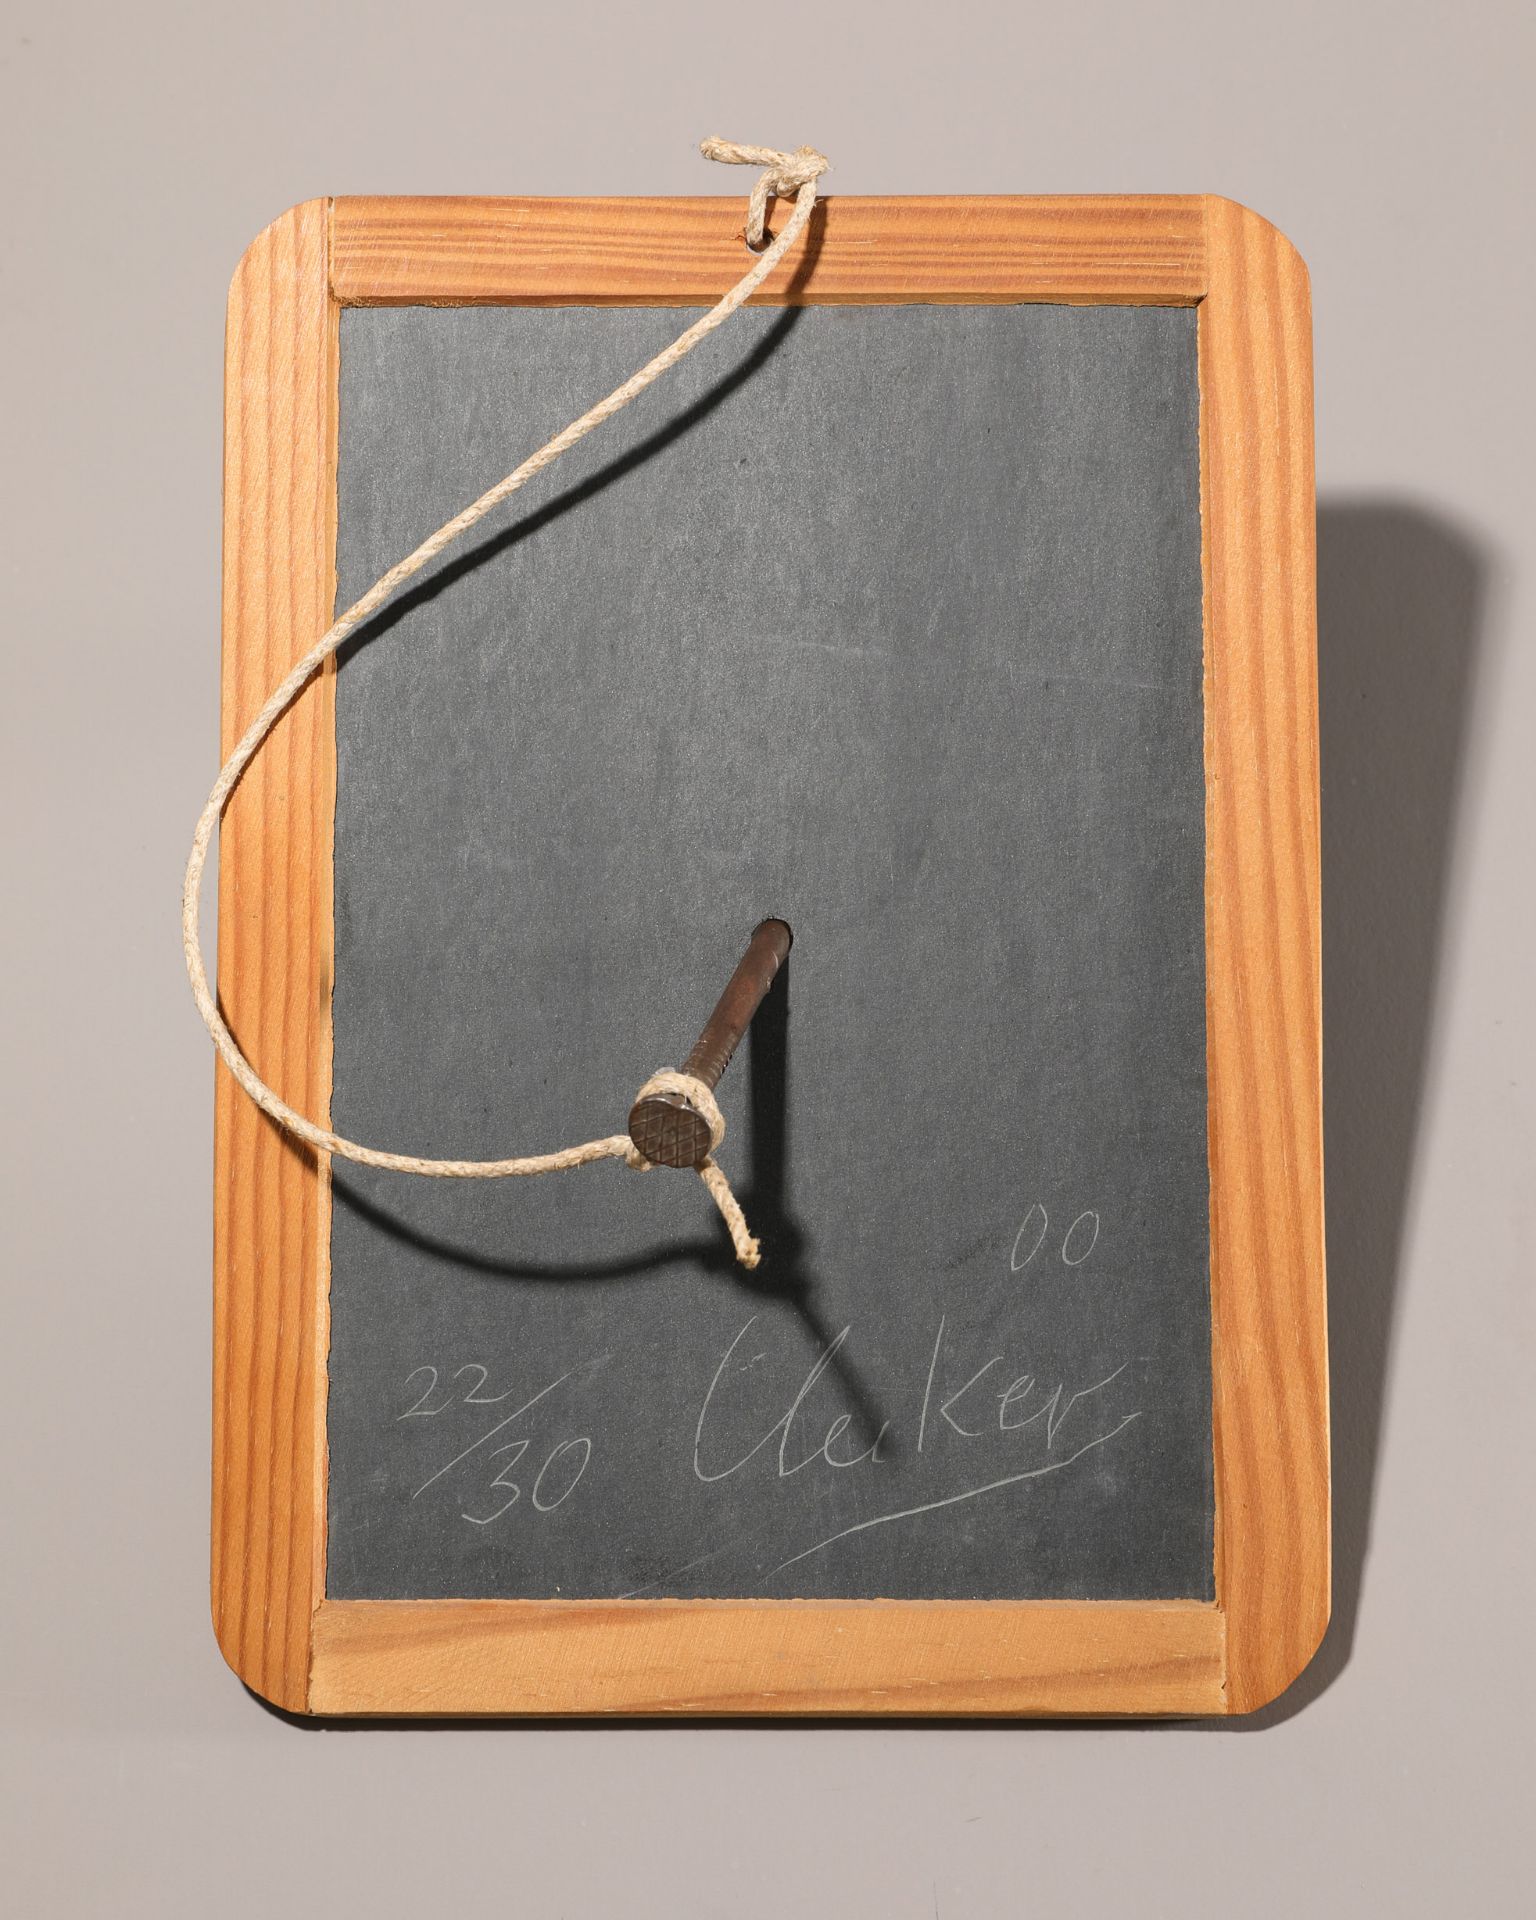 Günther Uecker*, Loch / Hole, 2000, slate, nail, cord, Ex. 22/30 - Image 2 of 6